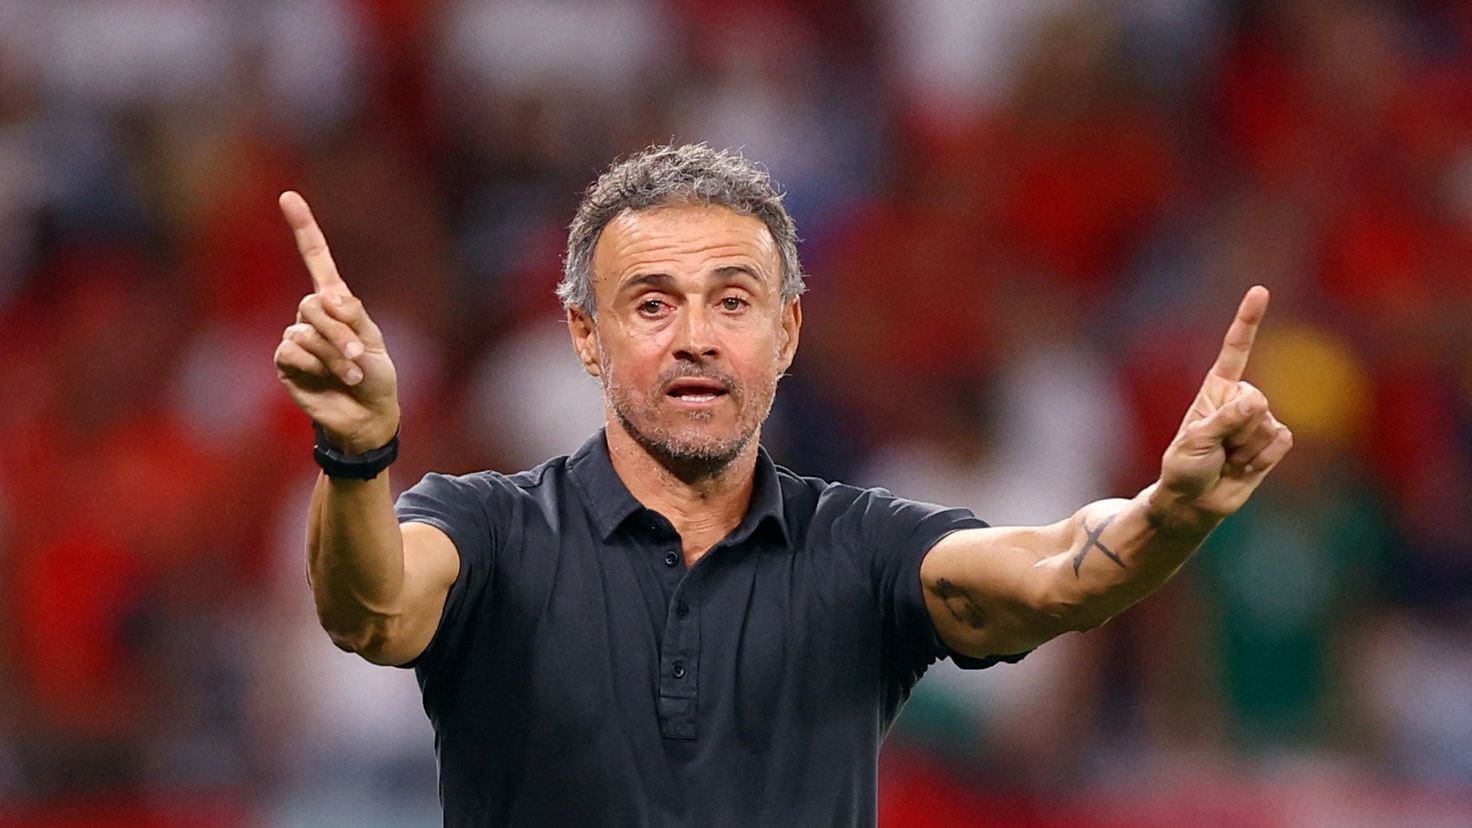 Could Luis Enrique replace Luciano Spalletti at Napoli? - AS USA